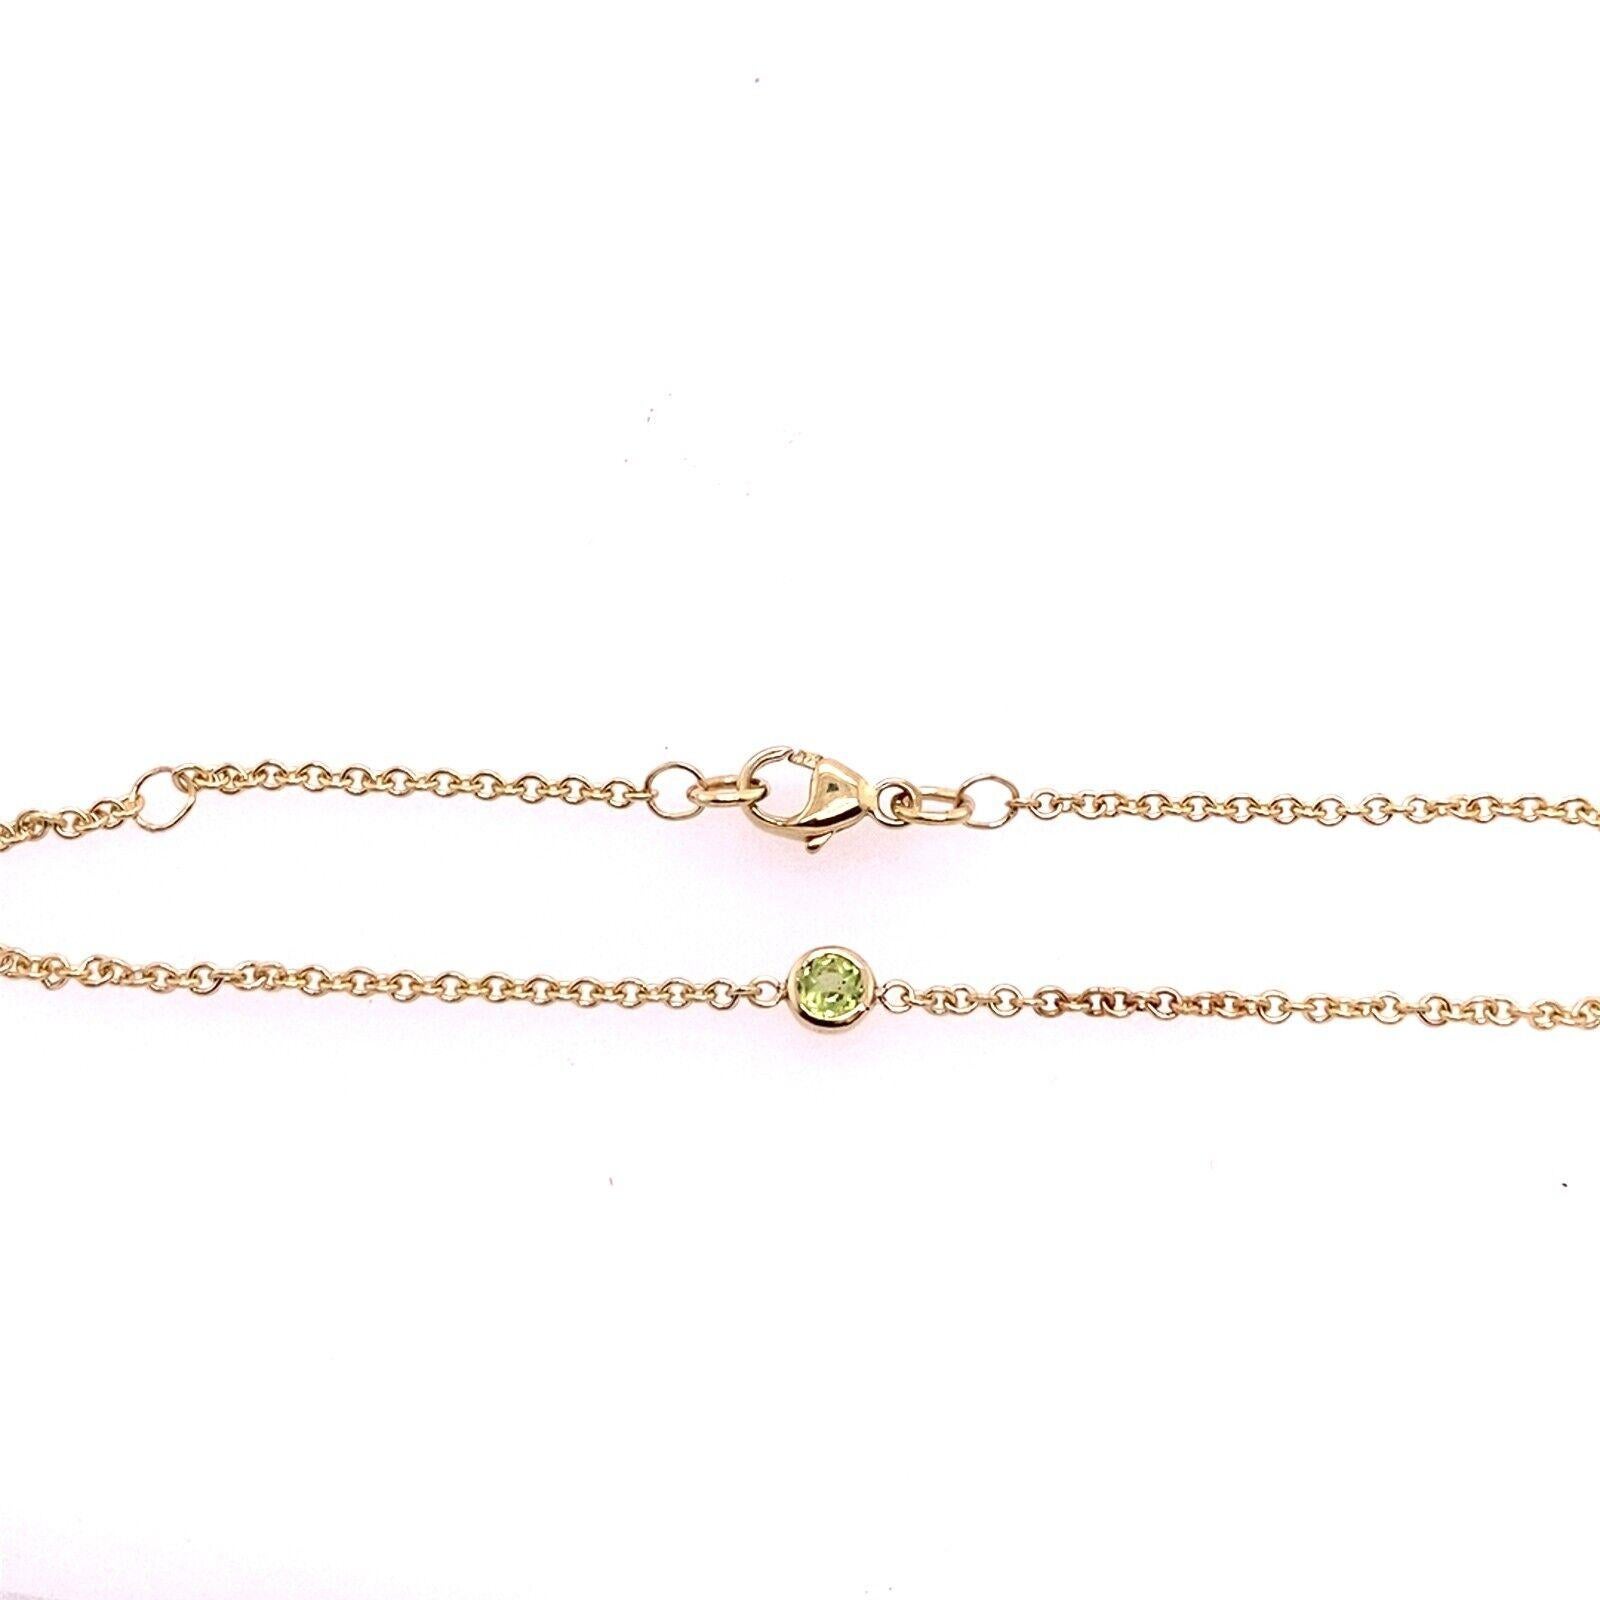 This August birthstone bracelet set, crafted in 9ct Yellow Gold is the perfect gift to celebrate one’s birth month. The bracelet comes with 1 round cut peridot, which is the birthstone for August, and a lobster clasp for easy wear.

Additional